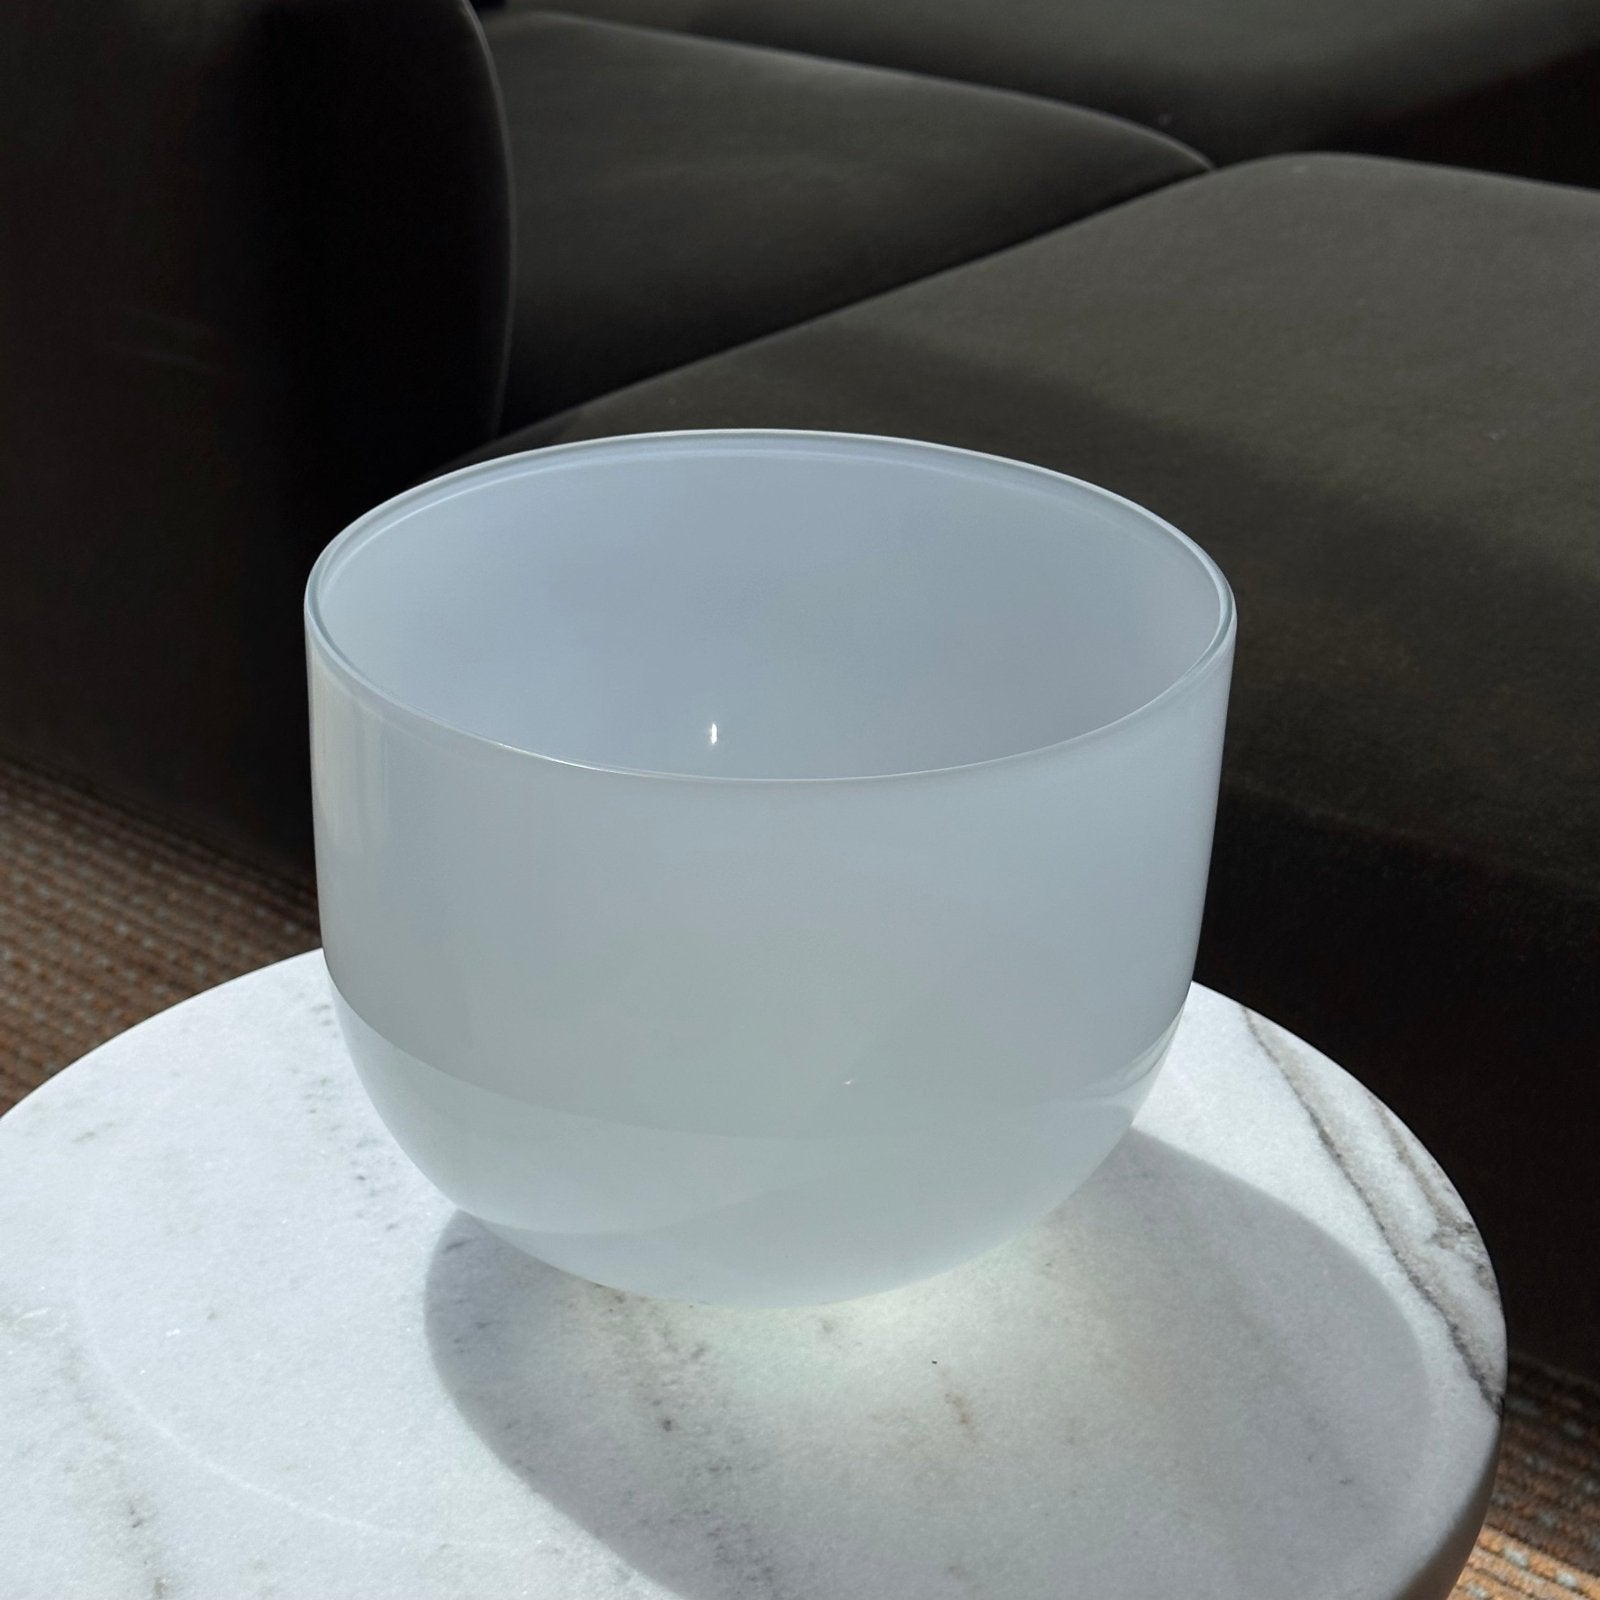 11" Crystal Singing Bowl - Made in New York, Grade A1 - Quartz Crystal Singing Bowl Made in USA